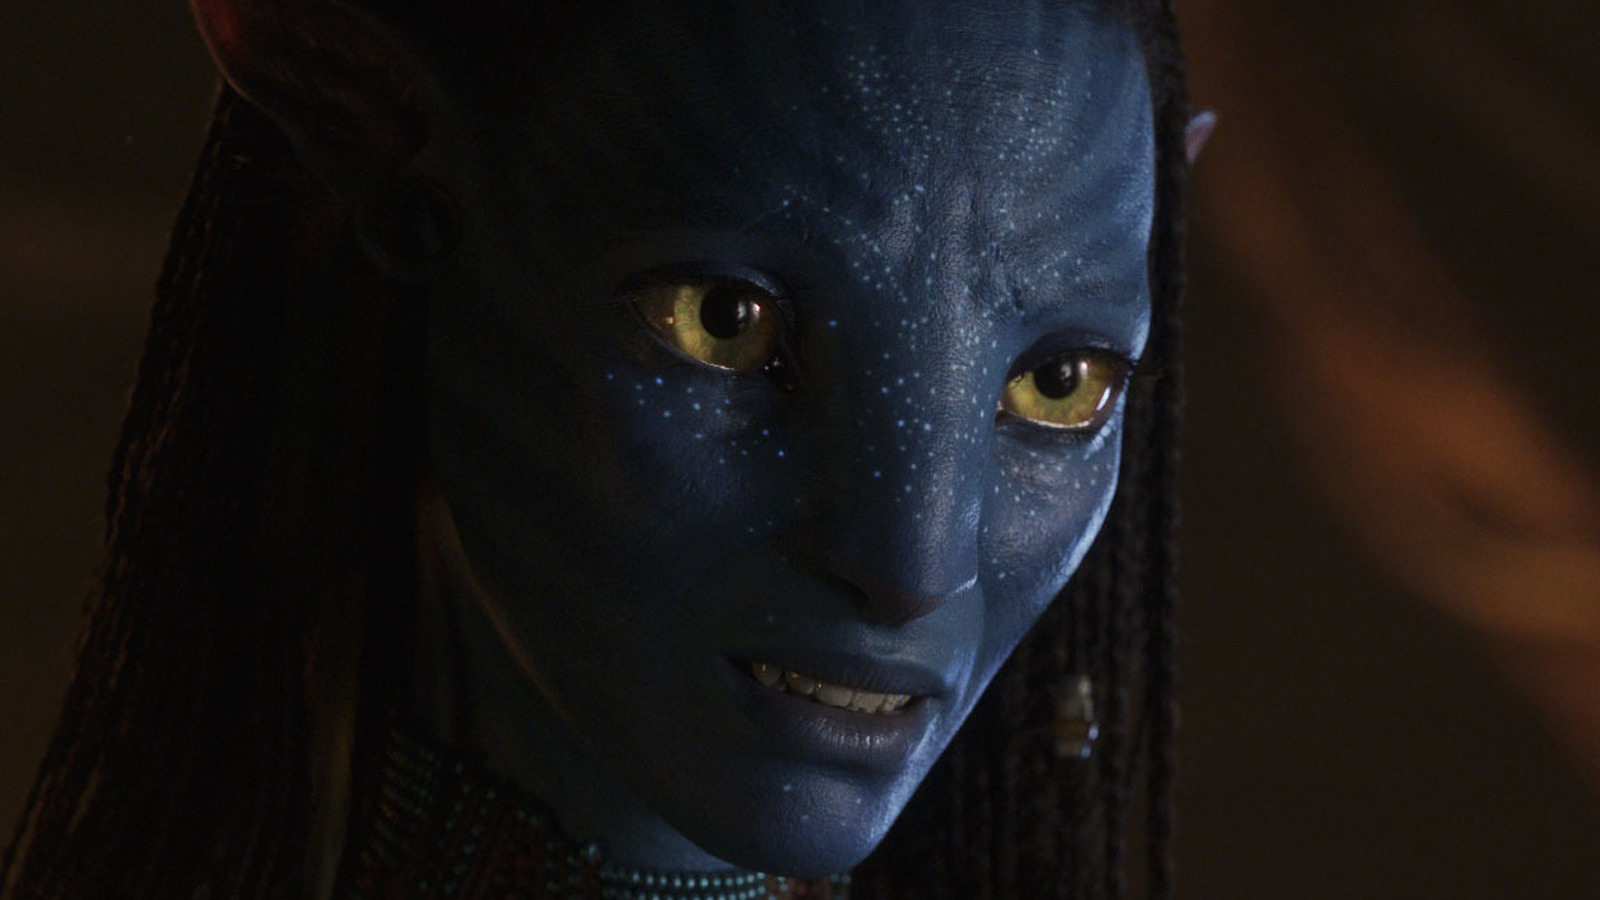 Avatar 2 Outpaces The Original's Box Office Numbers In Its 3rd Week